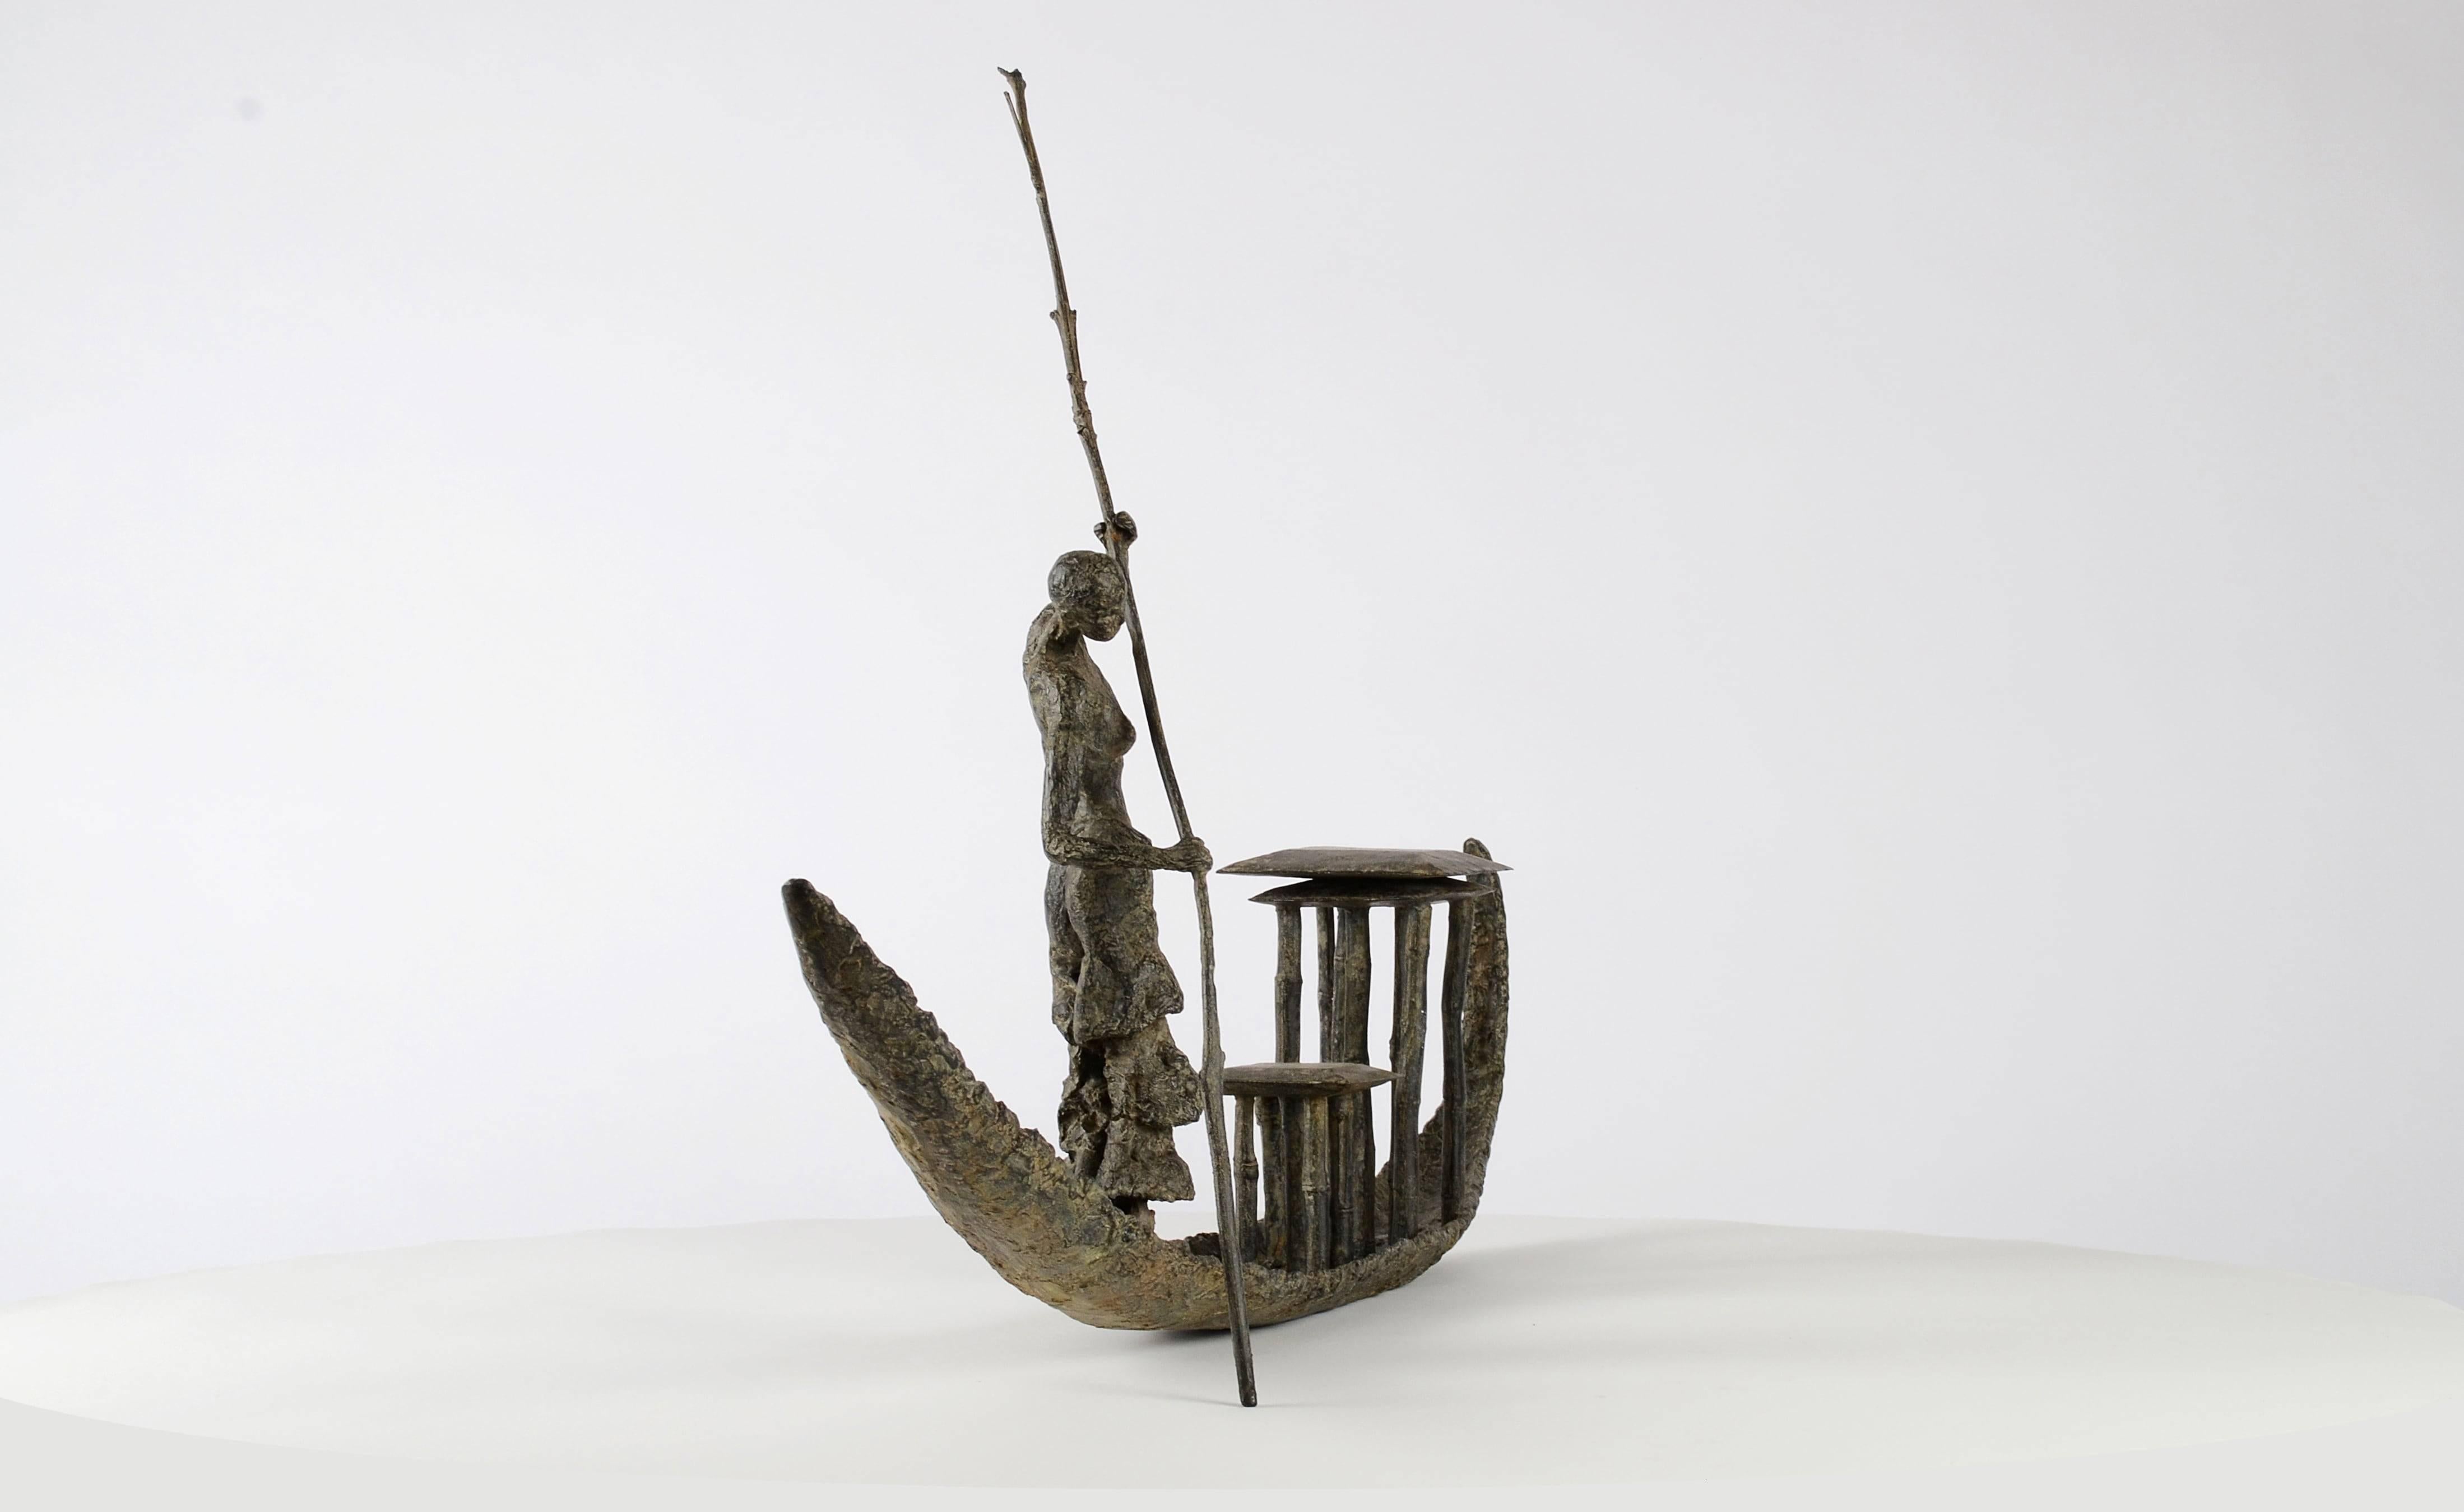 D’une Rive à l’Autre is a bronze sculpture by French contemporary sculptor Marine de Soos. It represents a standing half-naked woman paddling a dugout canoe.
From Africa to the Orient, Marine de Soos relates true stories and conveys moments of pure